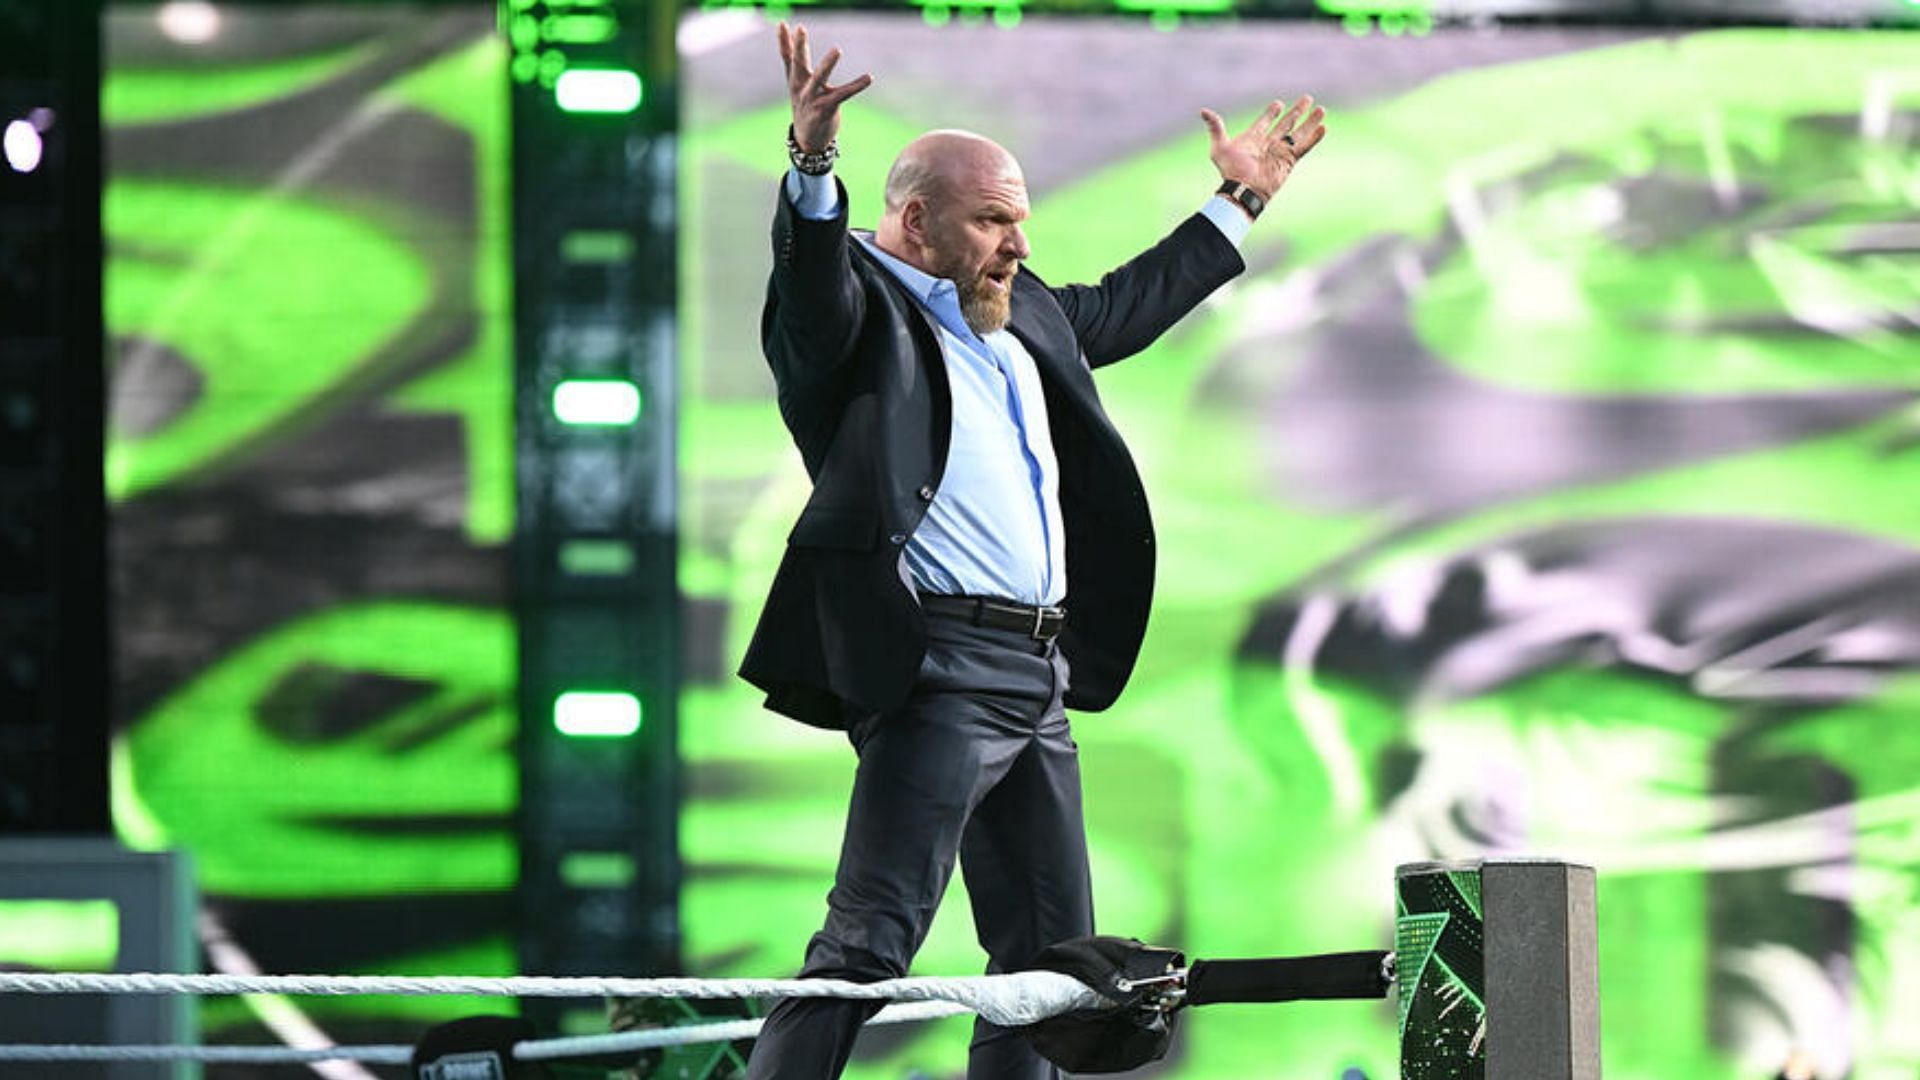 Triple H is the mastermind behind the new era in WWE